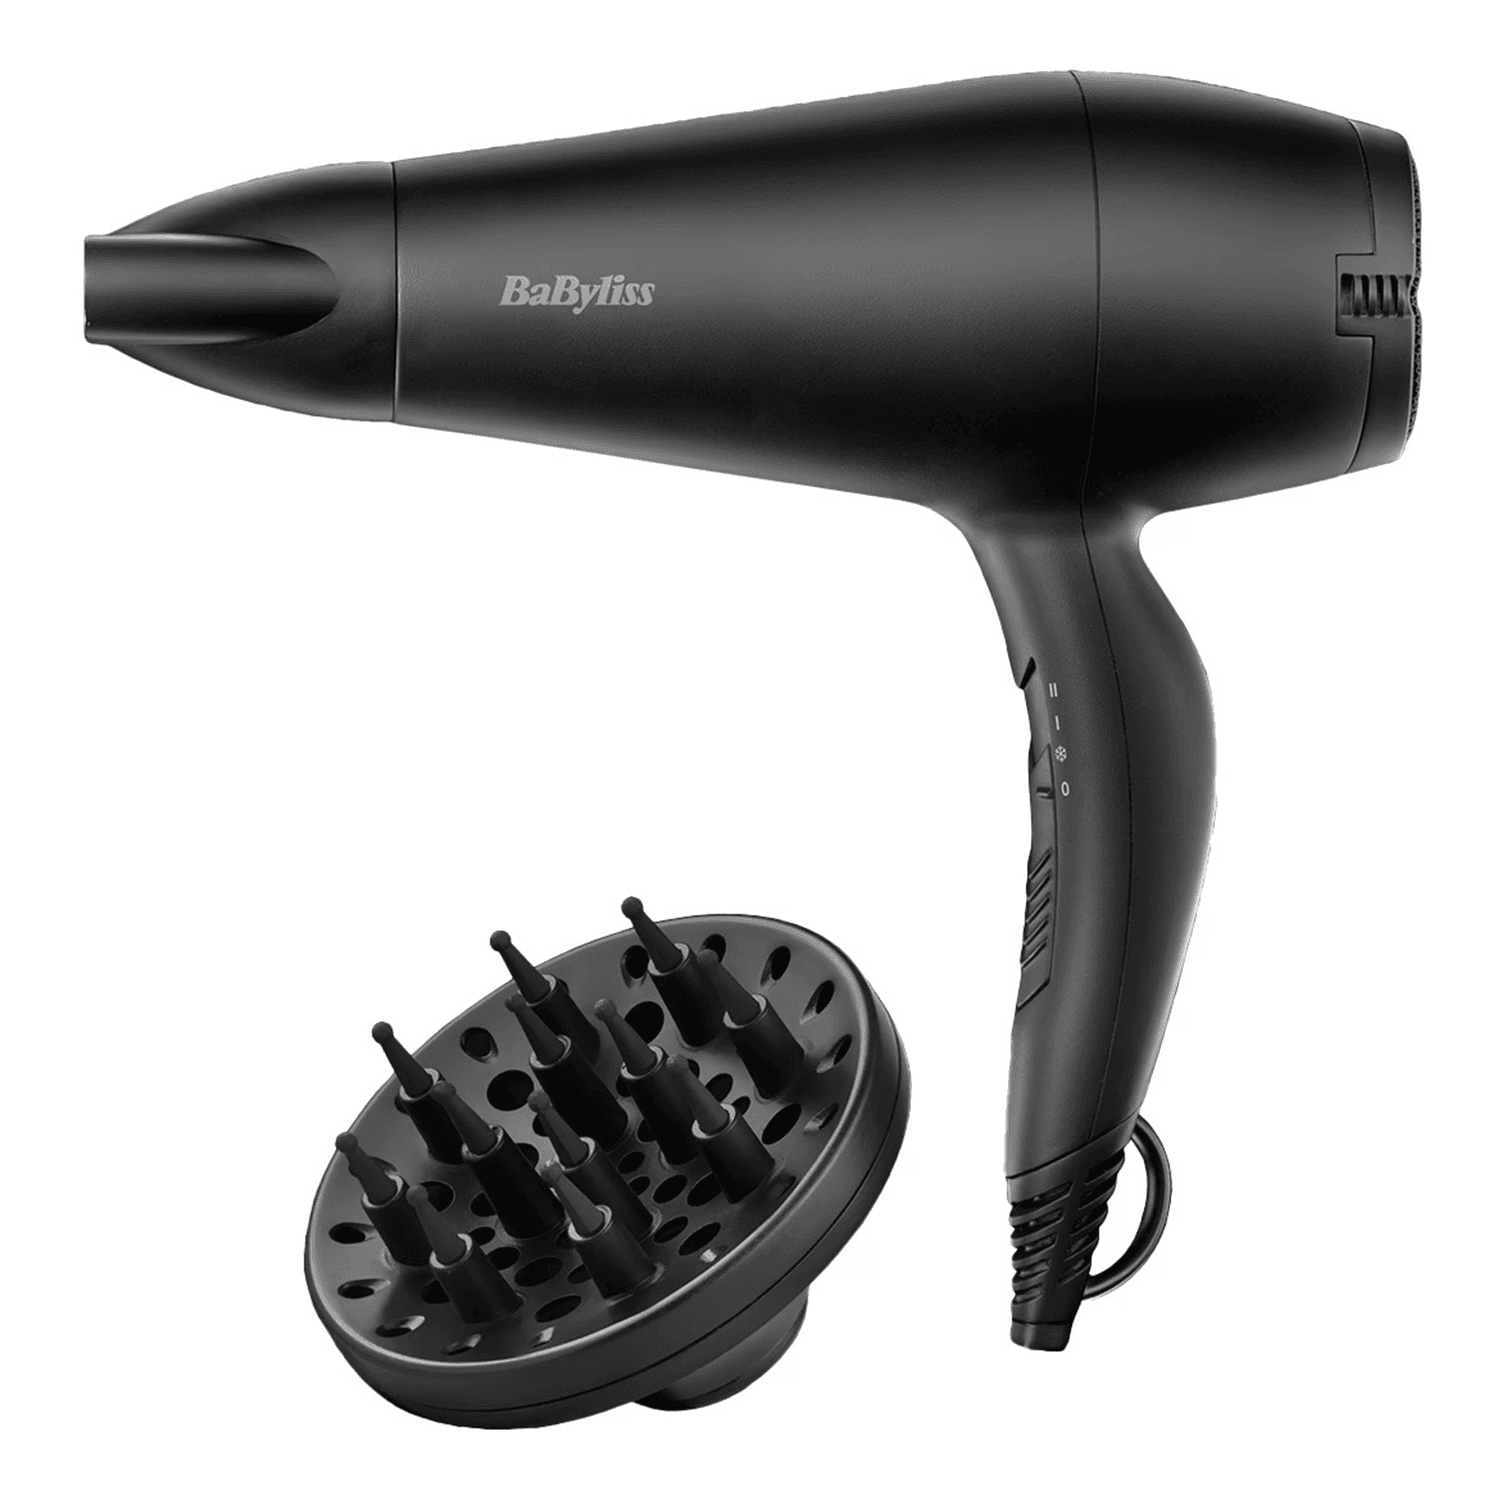 BaByliss - Hairdryer Power Smooth 2000 W